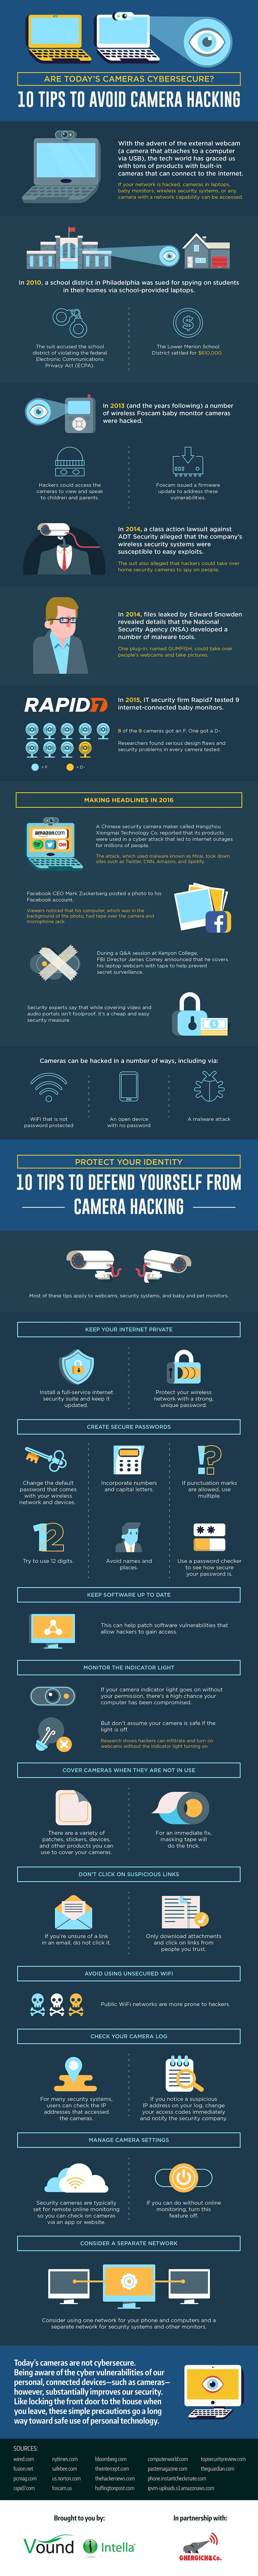 10 Tips to Avoid Camera Hacking - #infographic